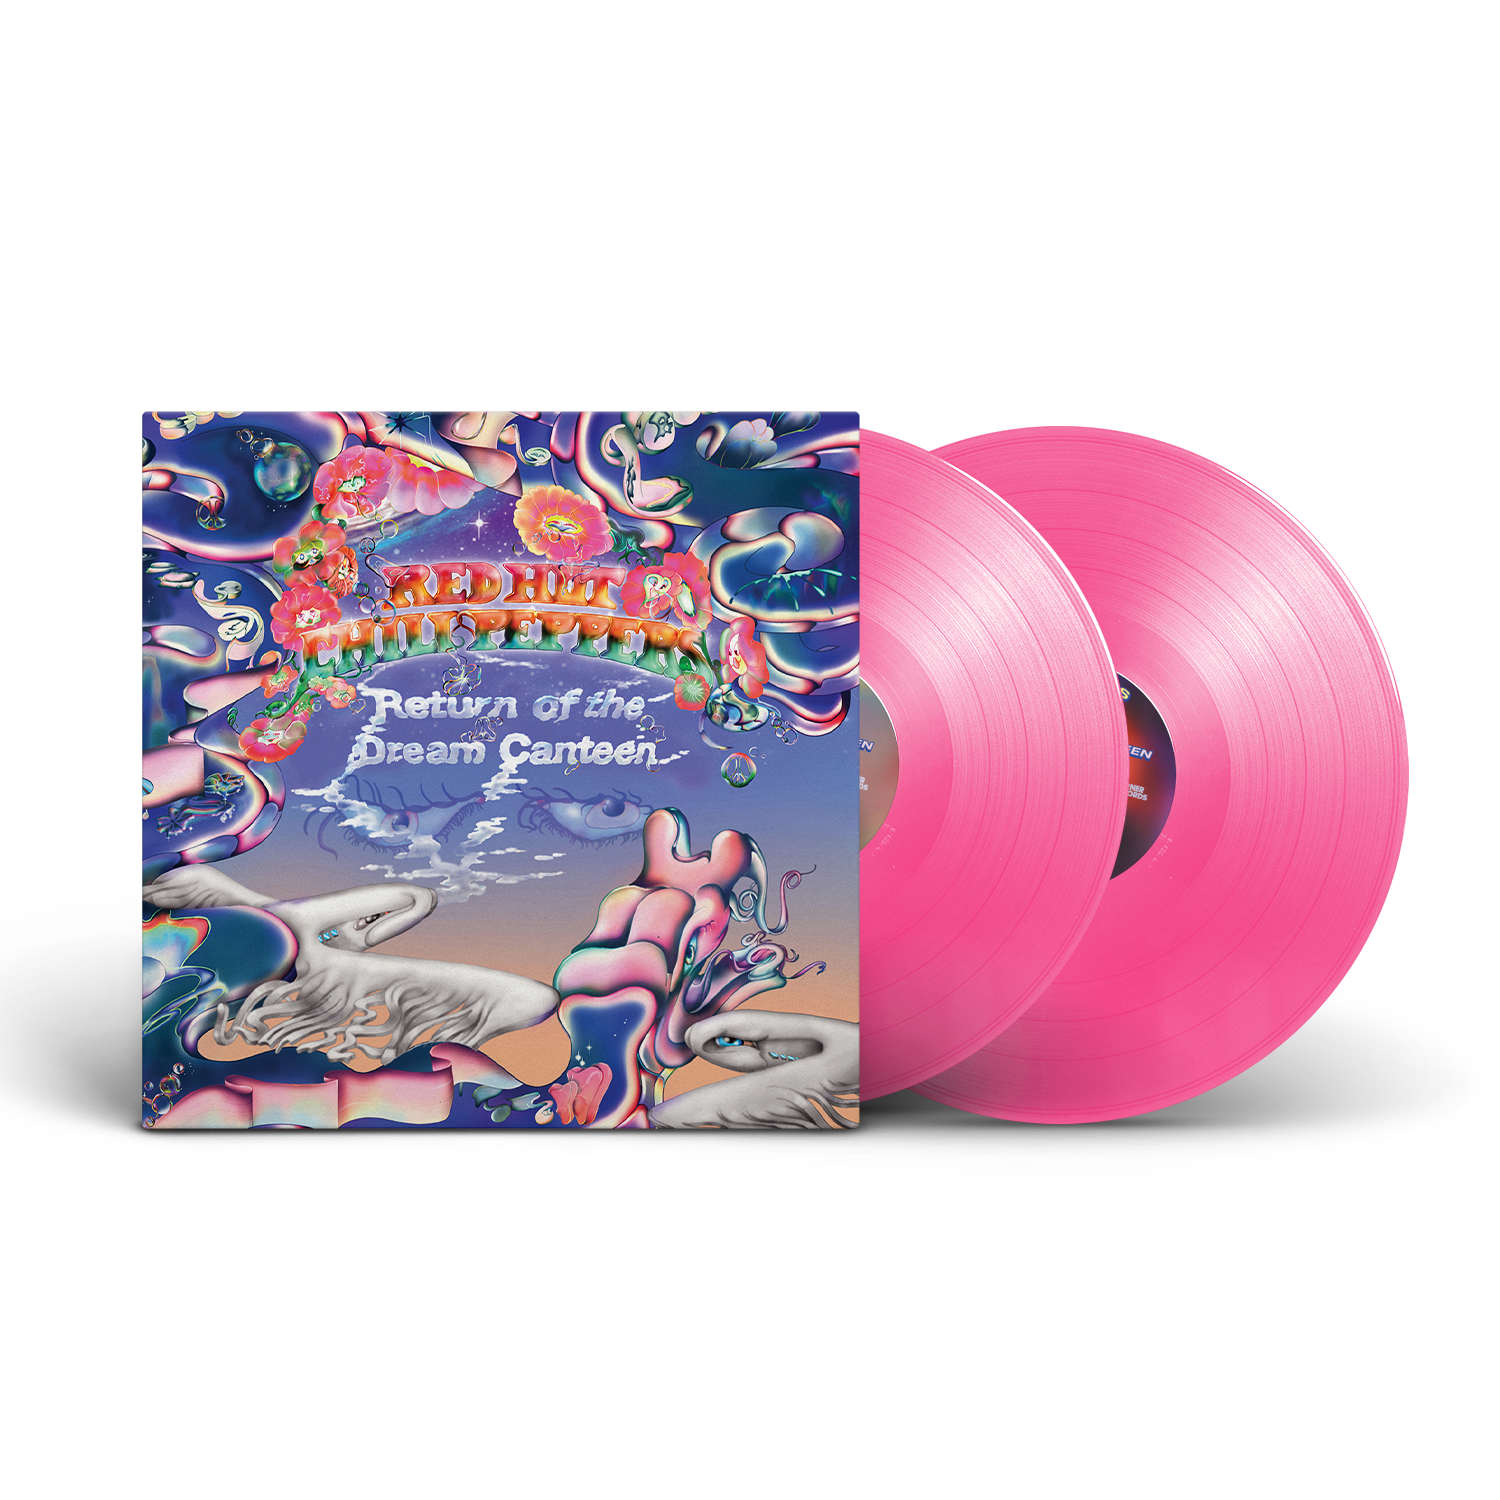 Return of the Canteen - LIMITED HOT PINK – Hot Chili Peppers